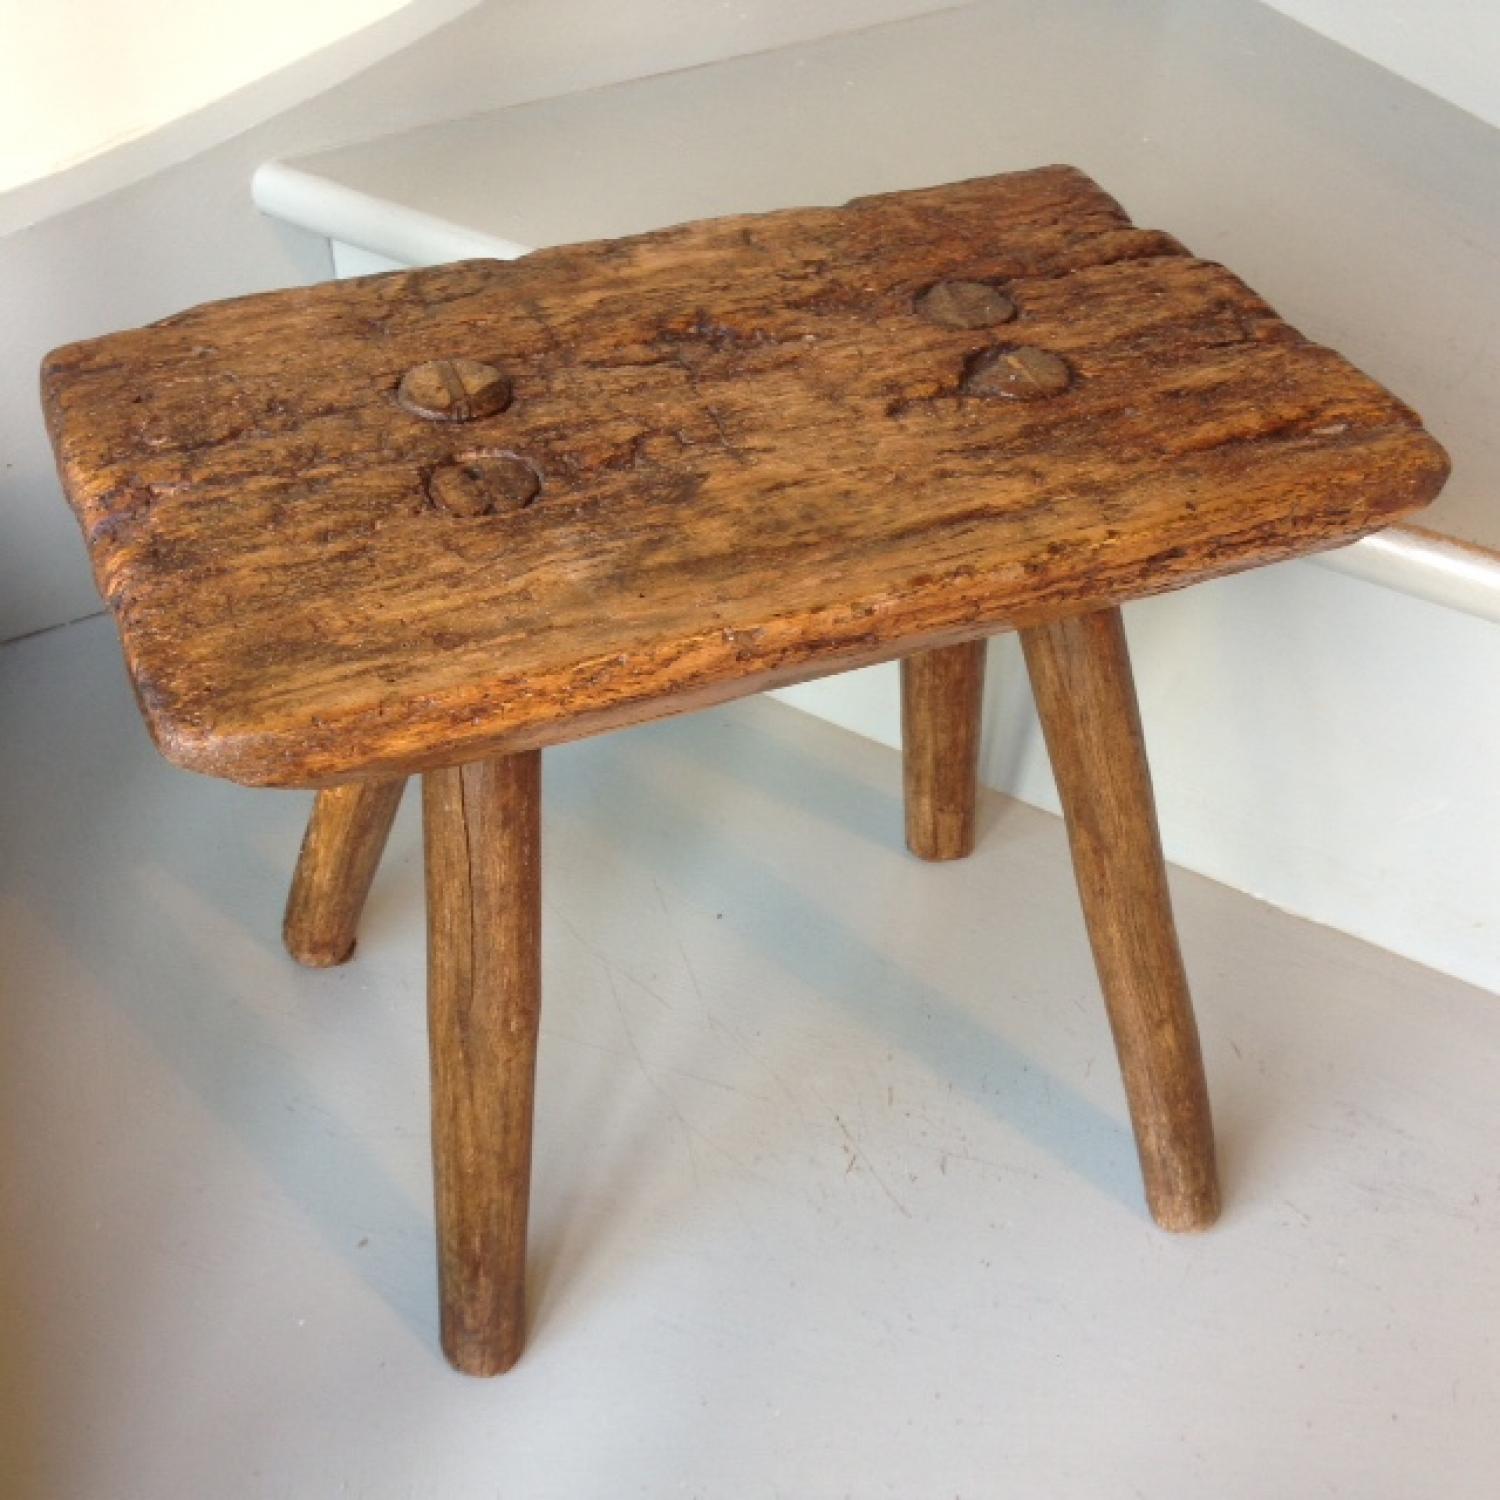 19th cent 4 legged Country Stool